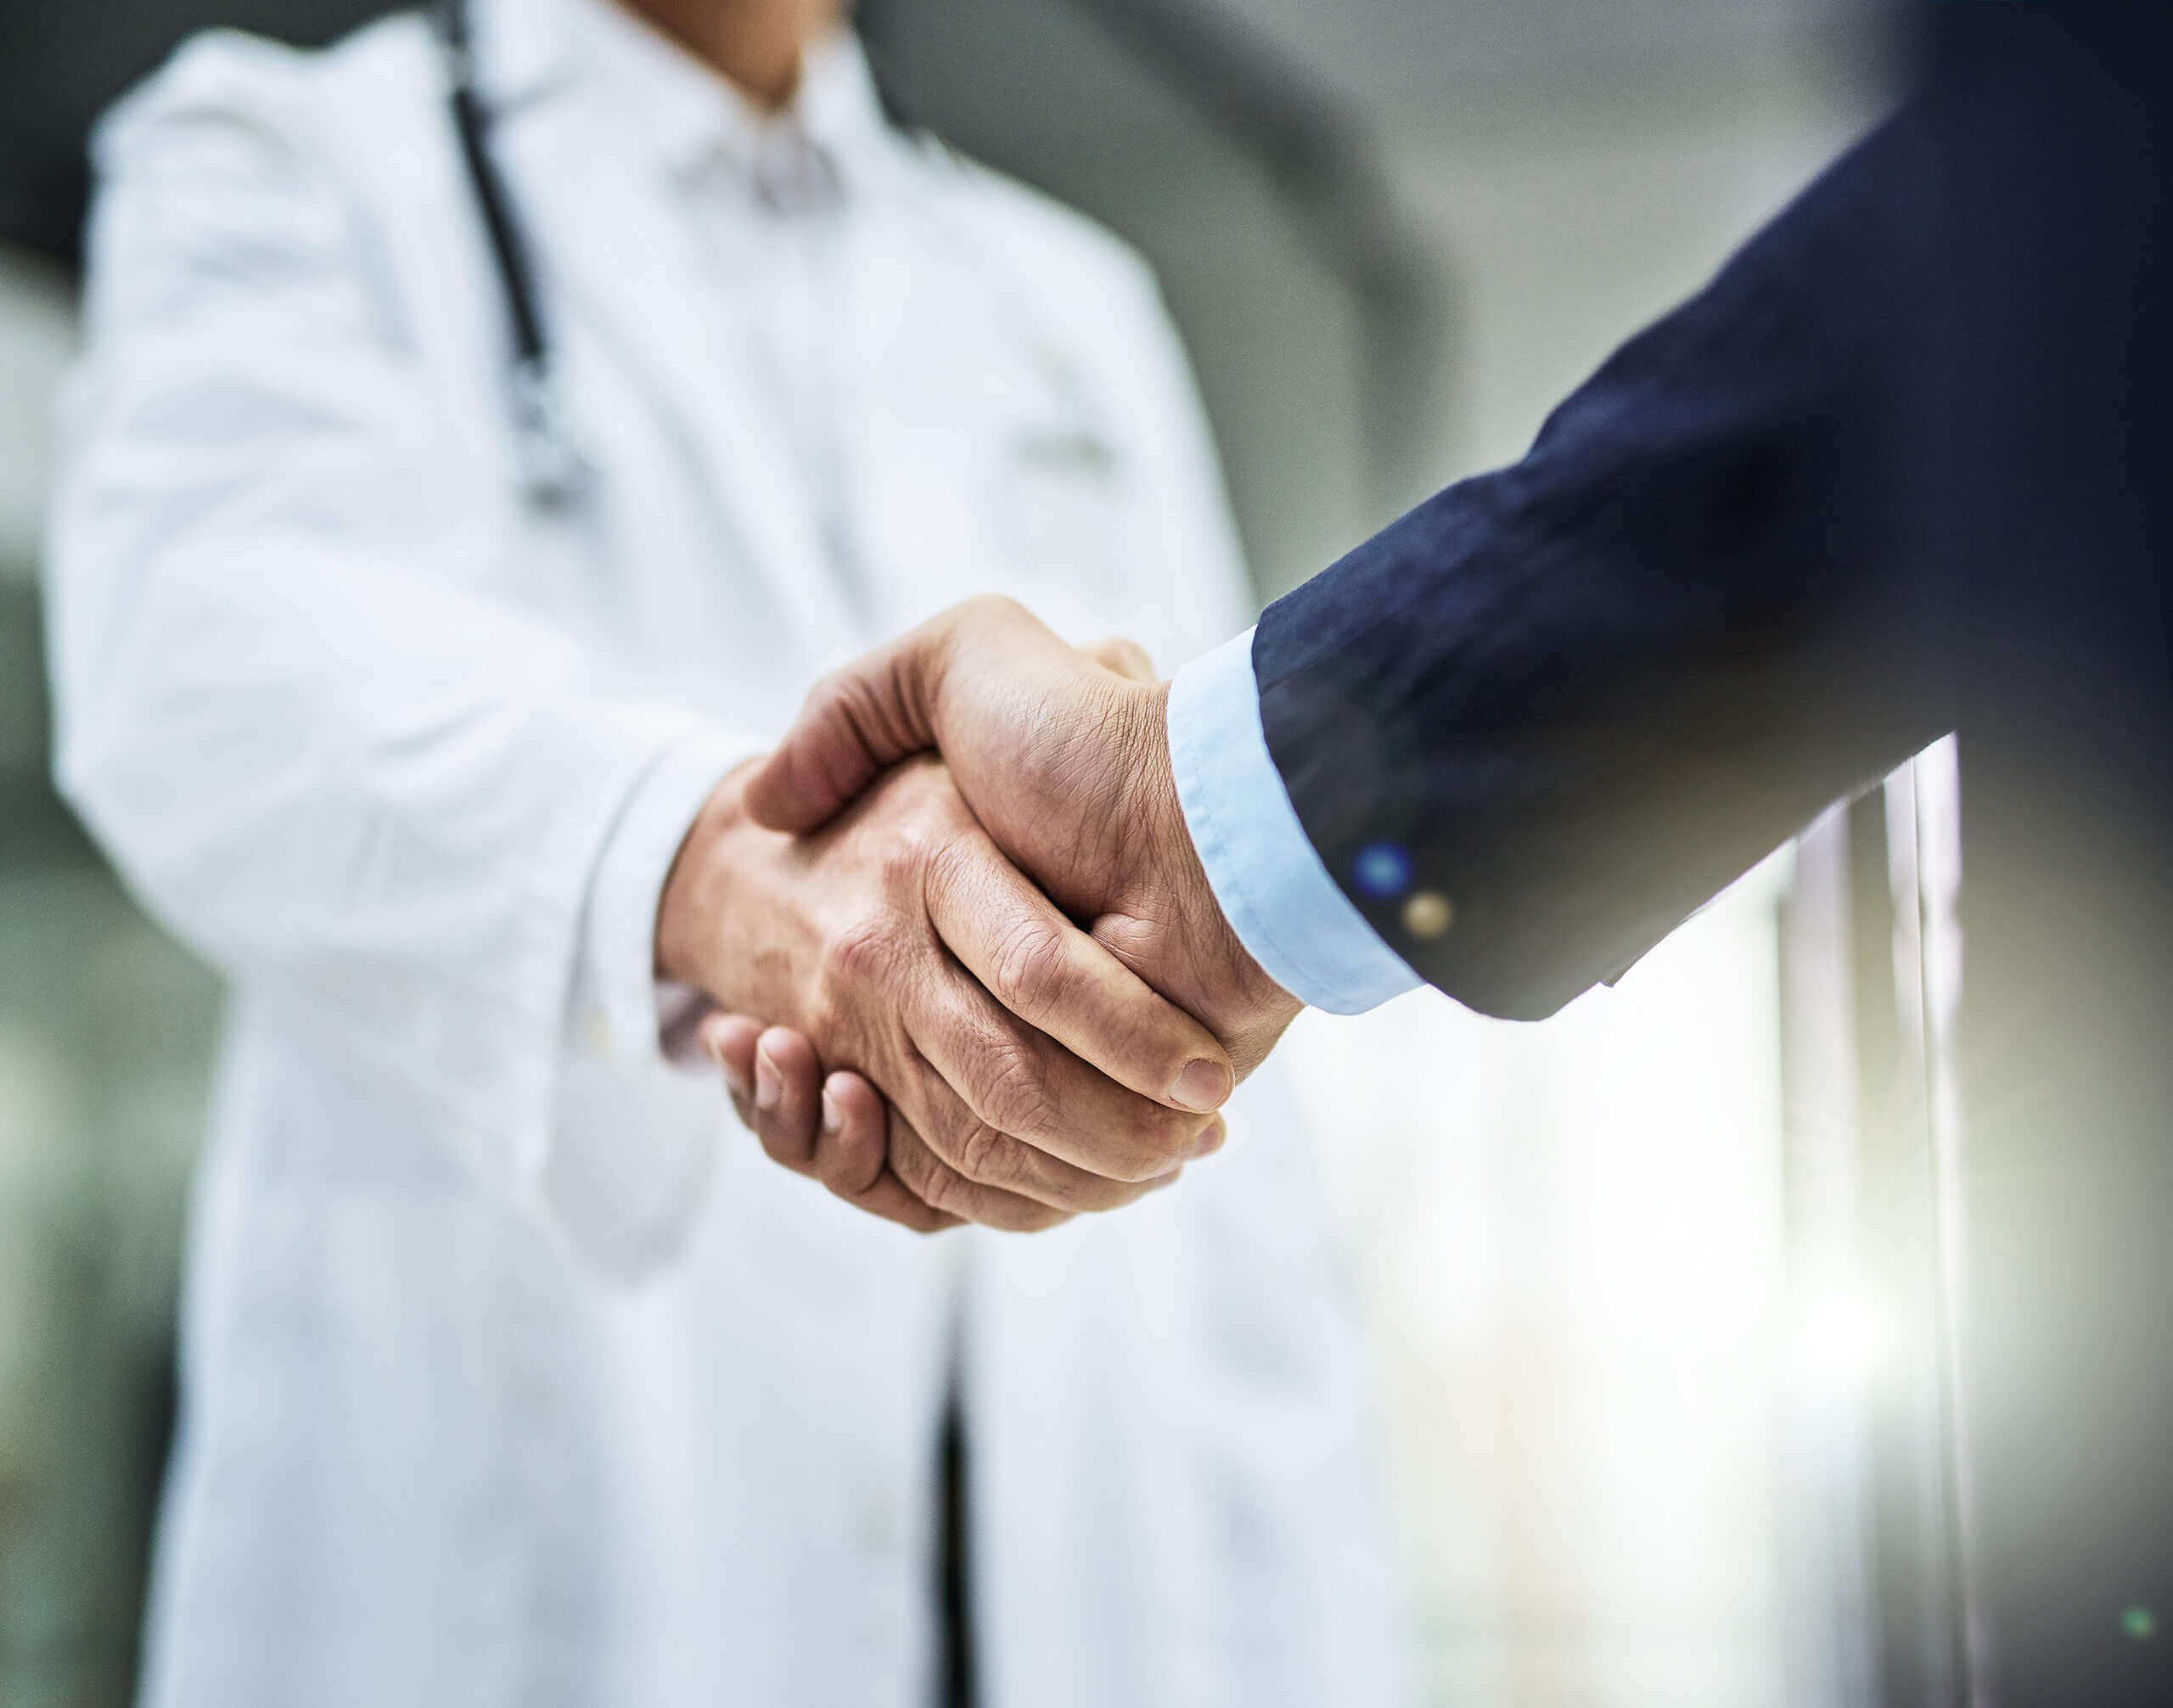 Showing a person in a lab coat shaking hands with a person wearing a business suit.